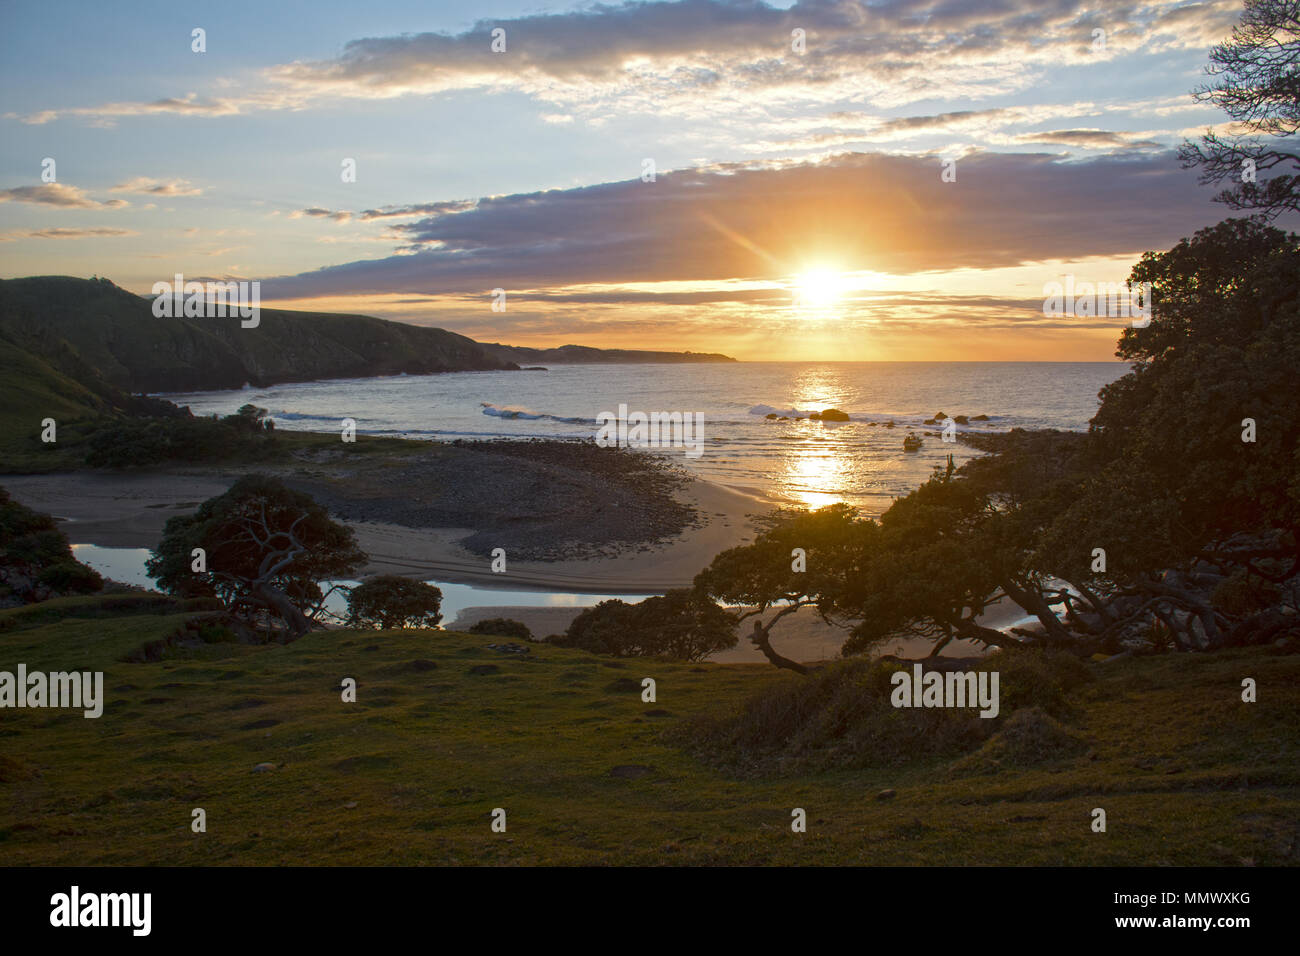 Sunrise at the mouth of Mapuzi river, Coffee Bay, Eastern Cape Wild Coast, South Africa Stock Photo